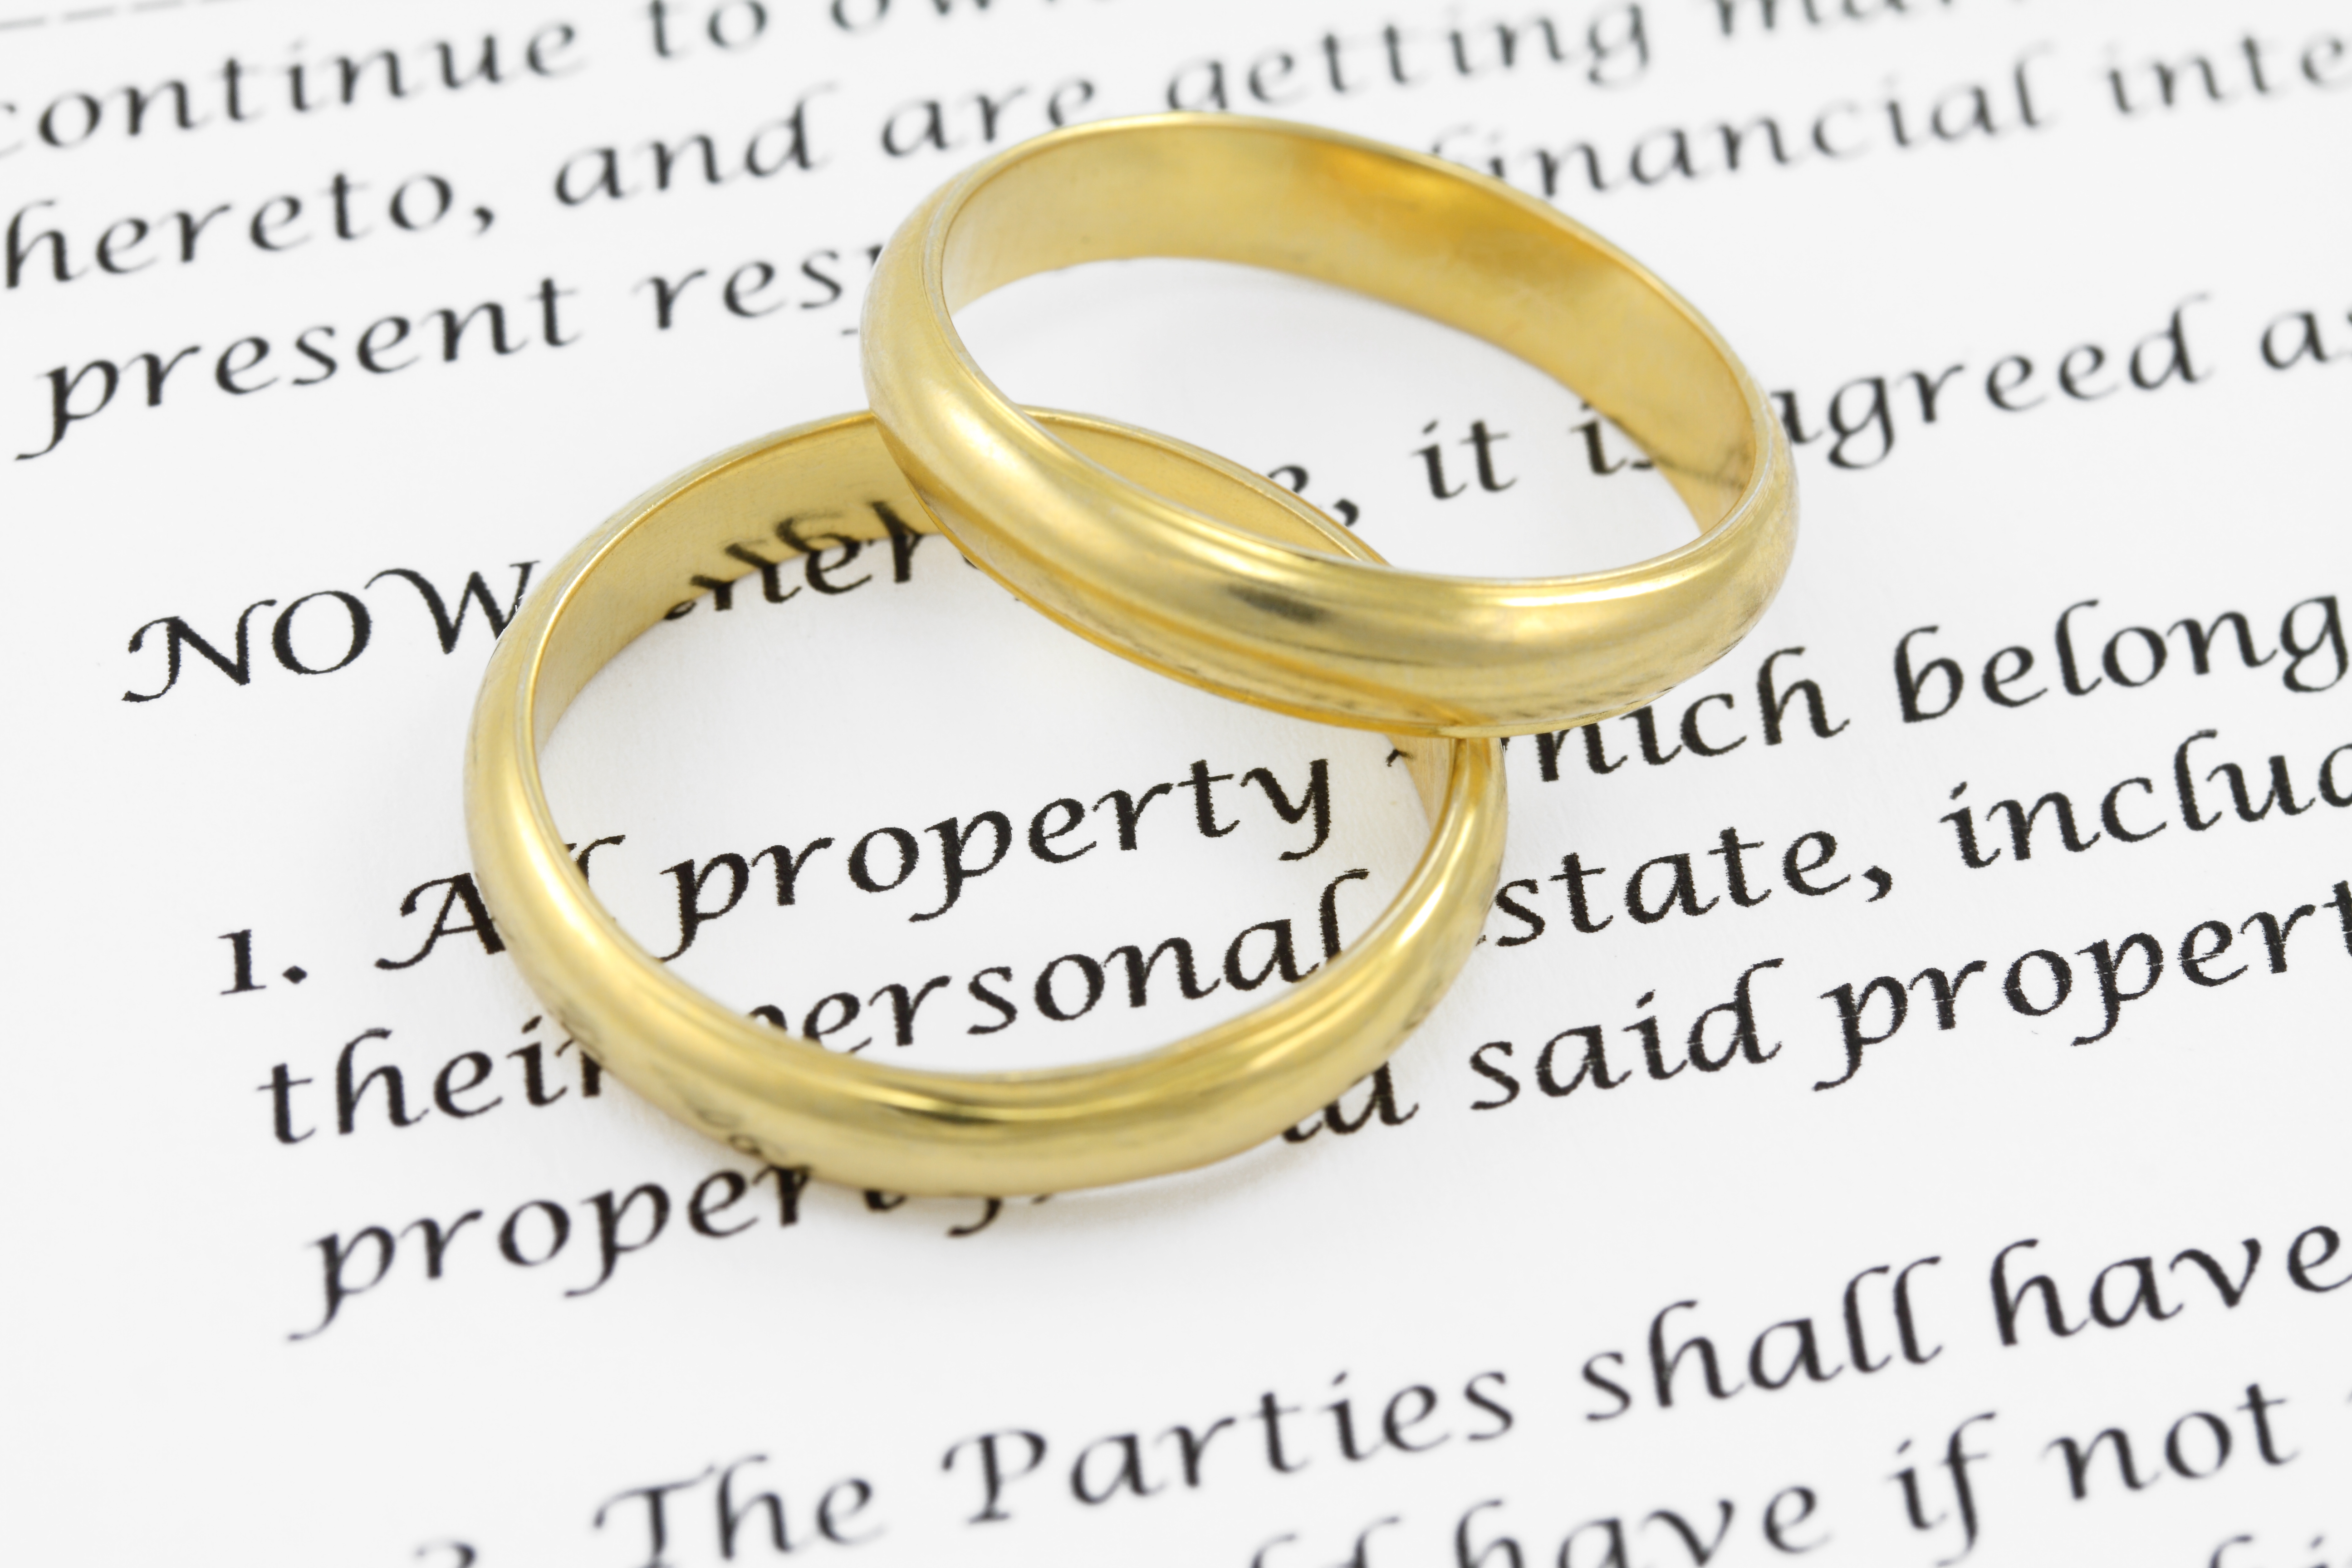 Prenuptial Agreement New York Jewelry Cars Heirlooms Gifts And The Need For A Prenuptial